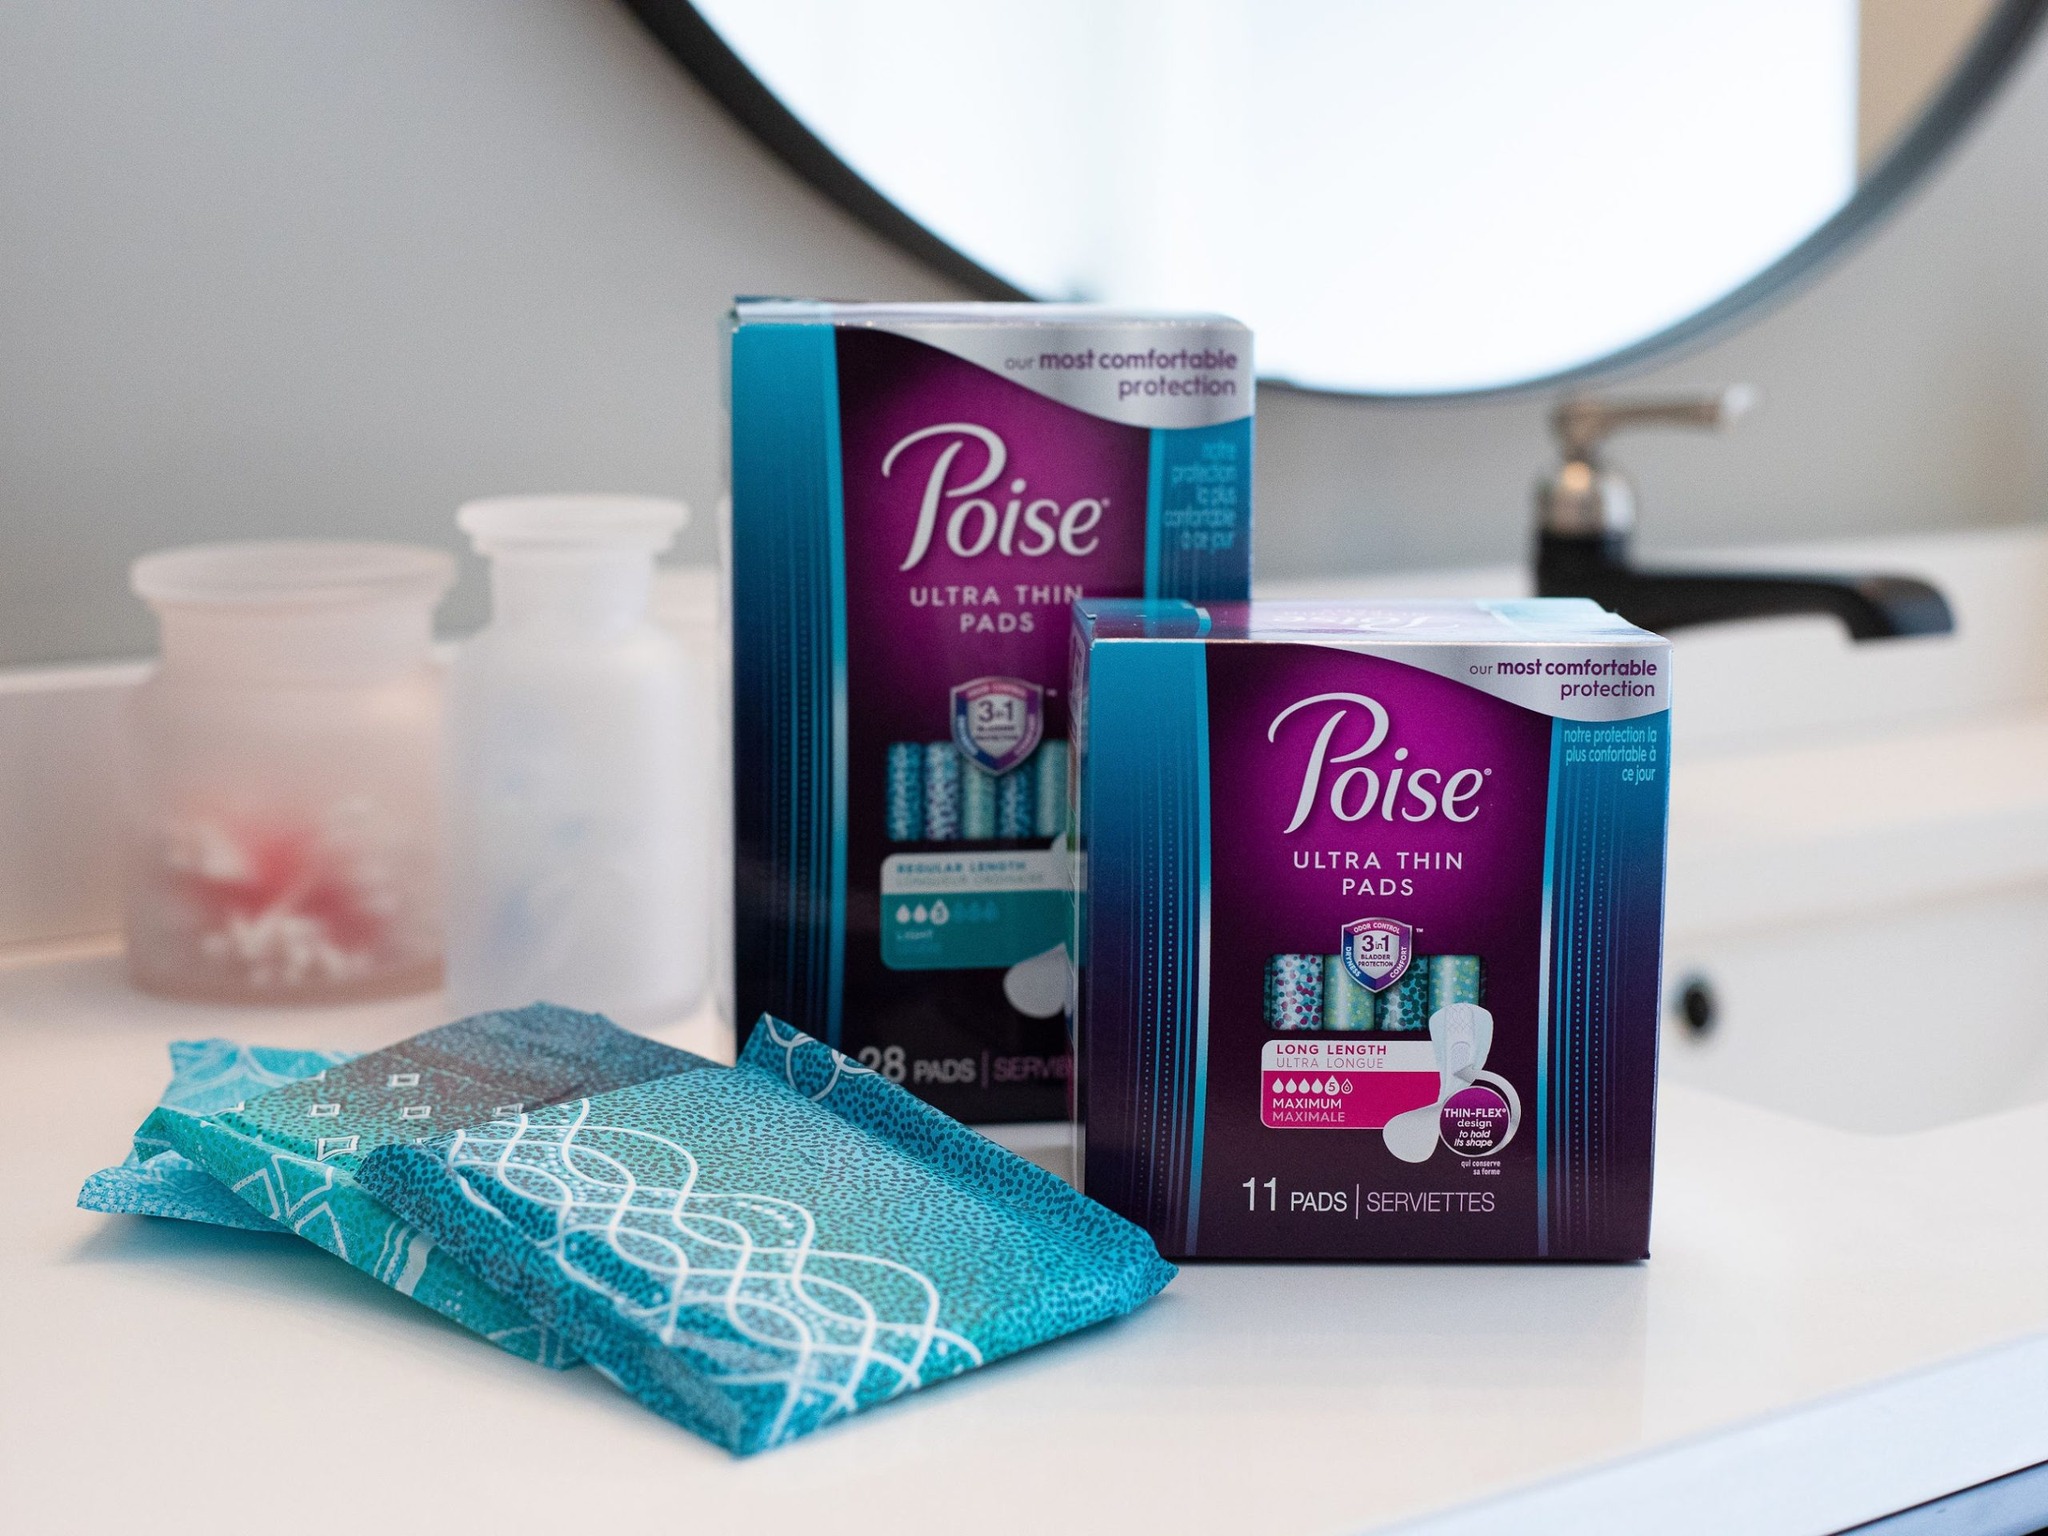 Poise Pads As Low As $1.49 At Publix